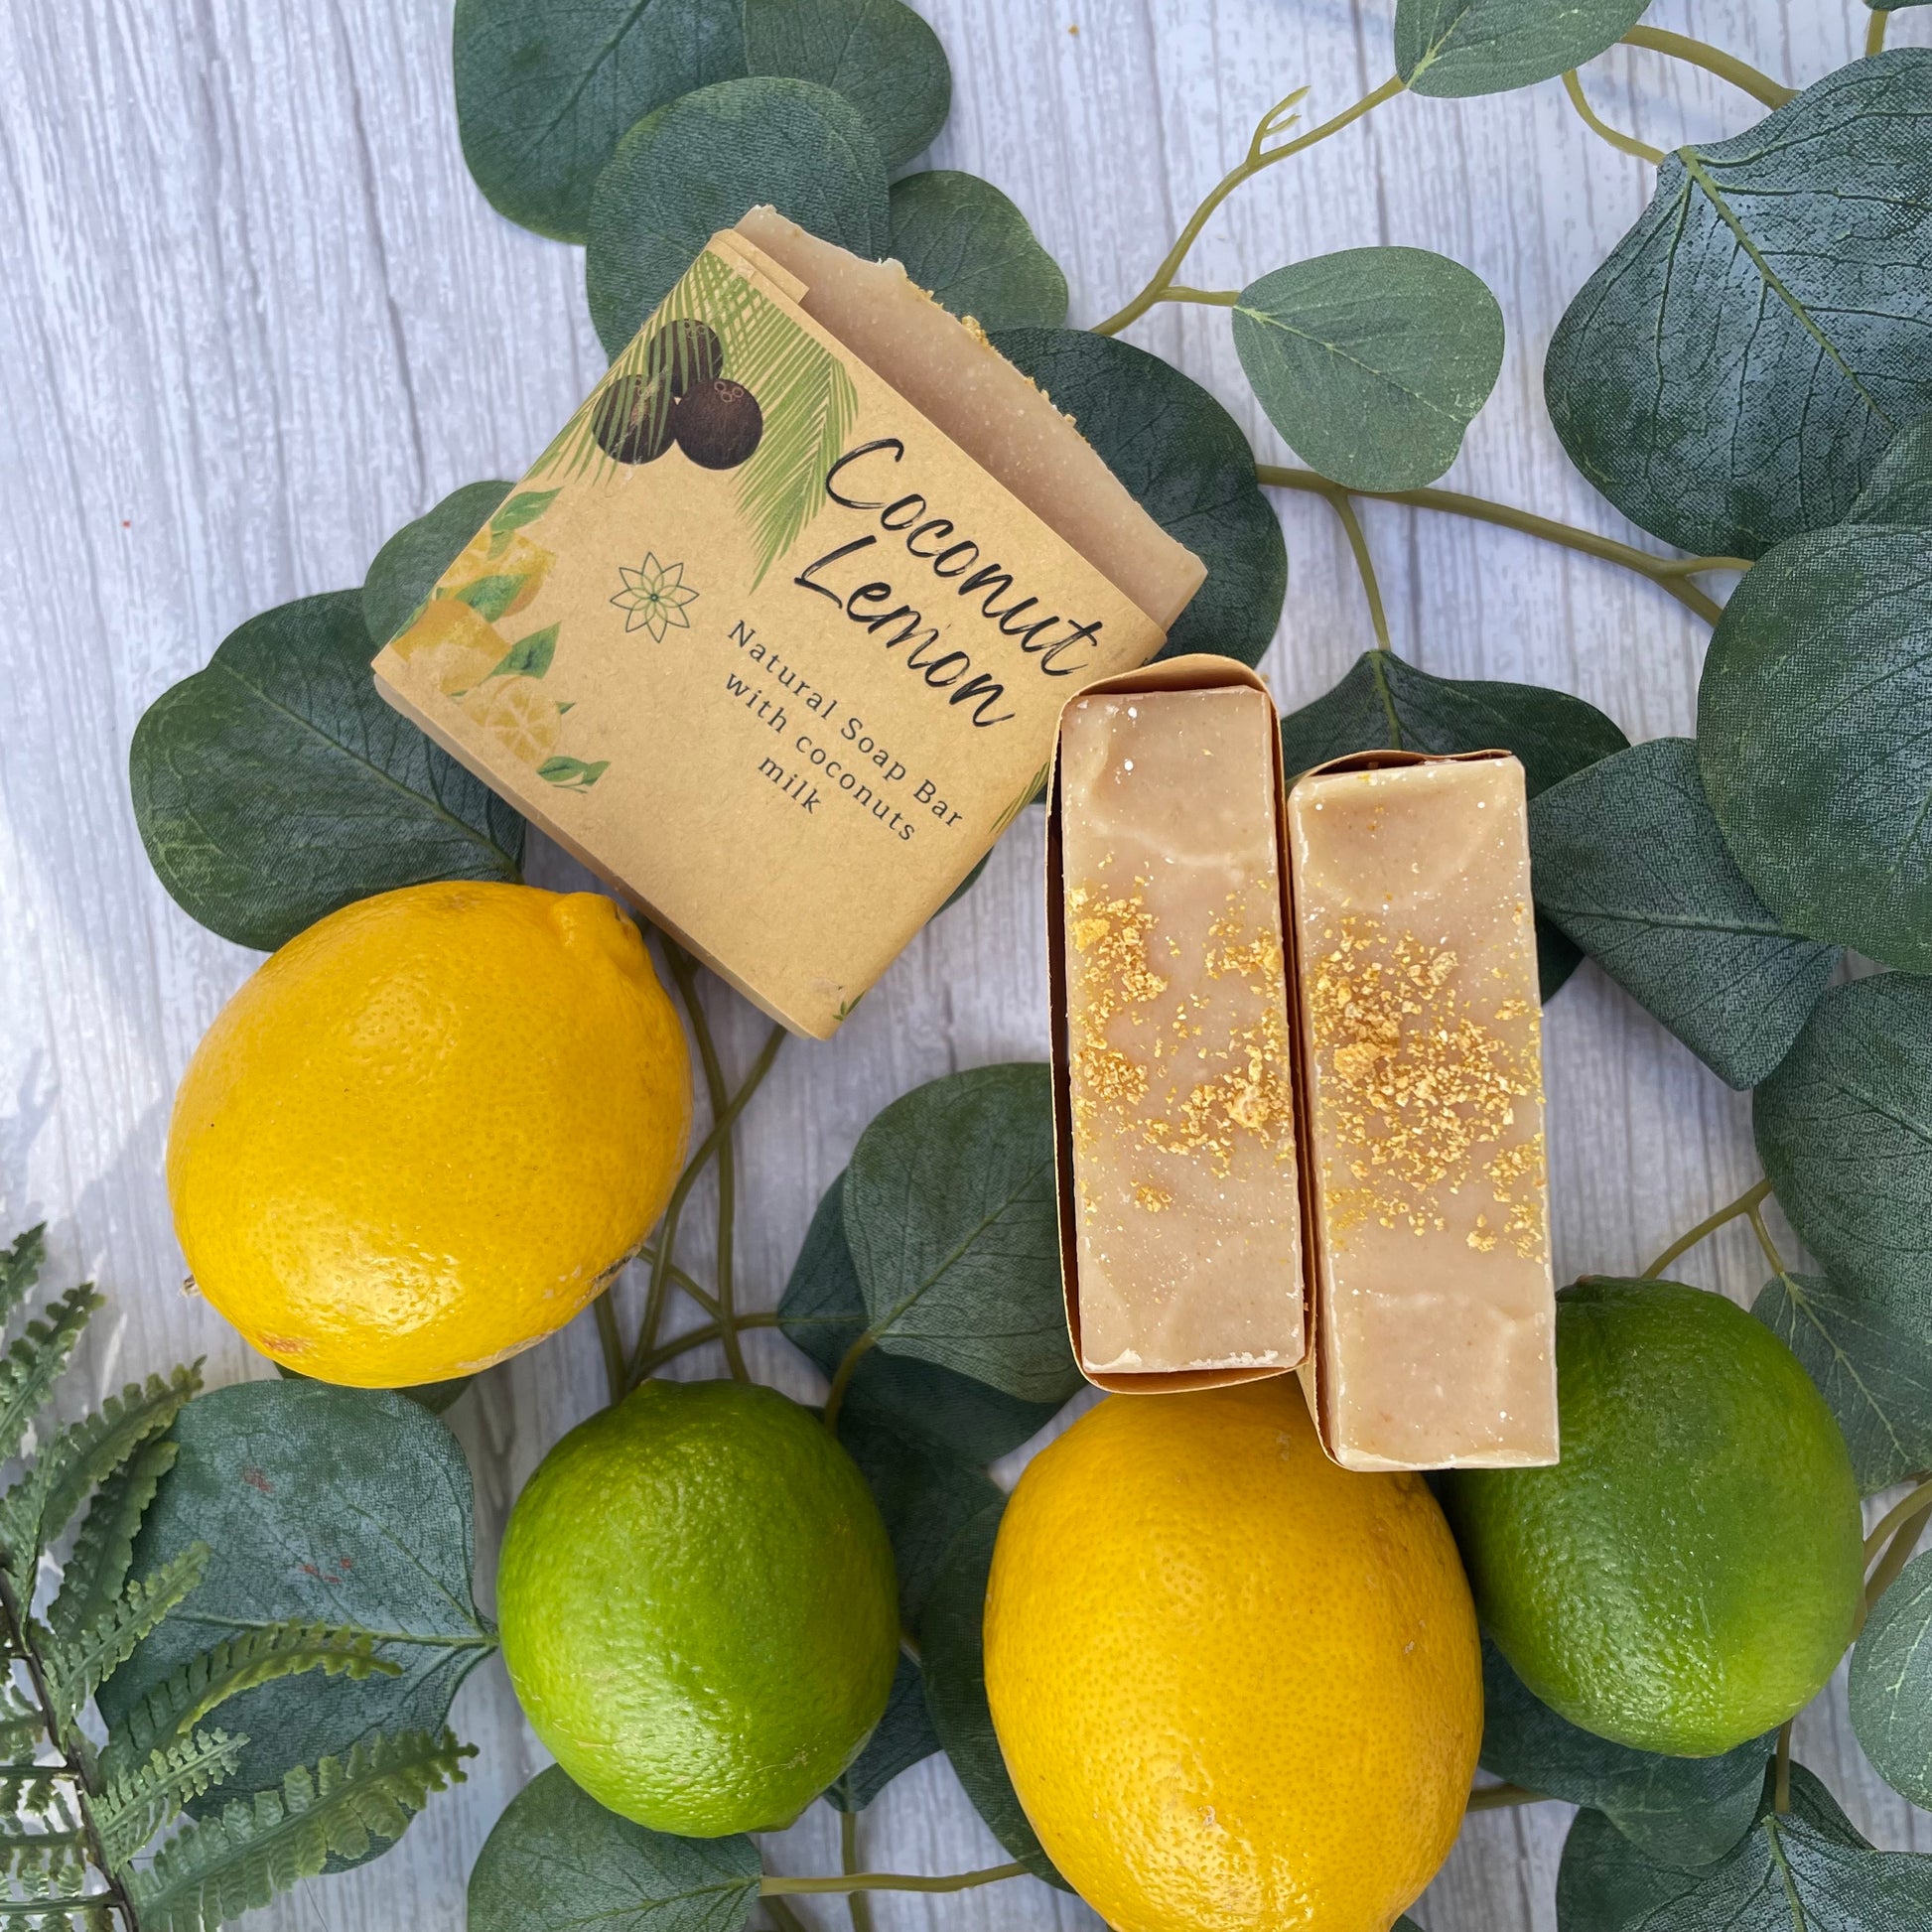 3 handcrafted vegan soaps, one showing the front label and 2 showing the beautiful top with lemon peel. the picture has green and yellow lemons to highlight the zesty and tropical vibe 